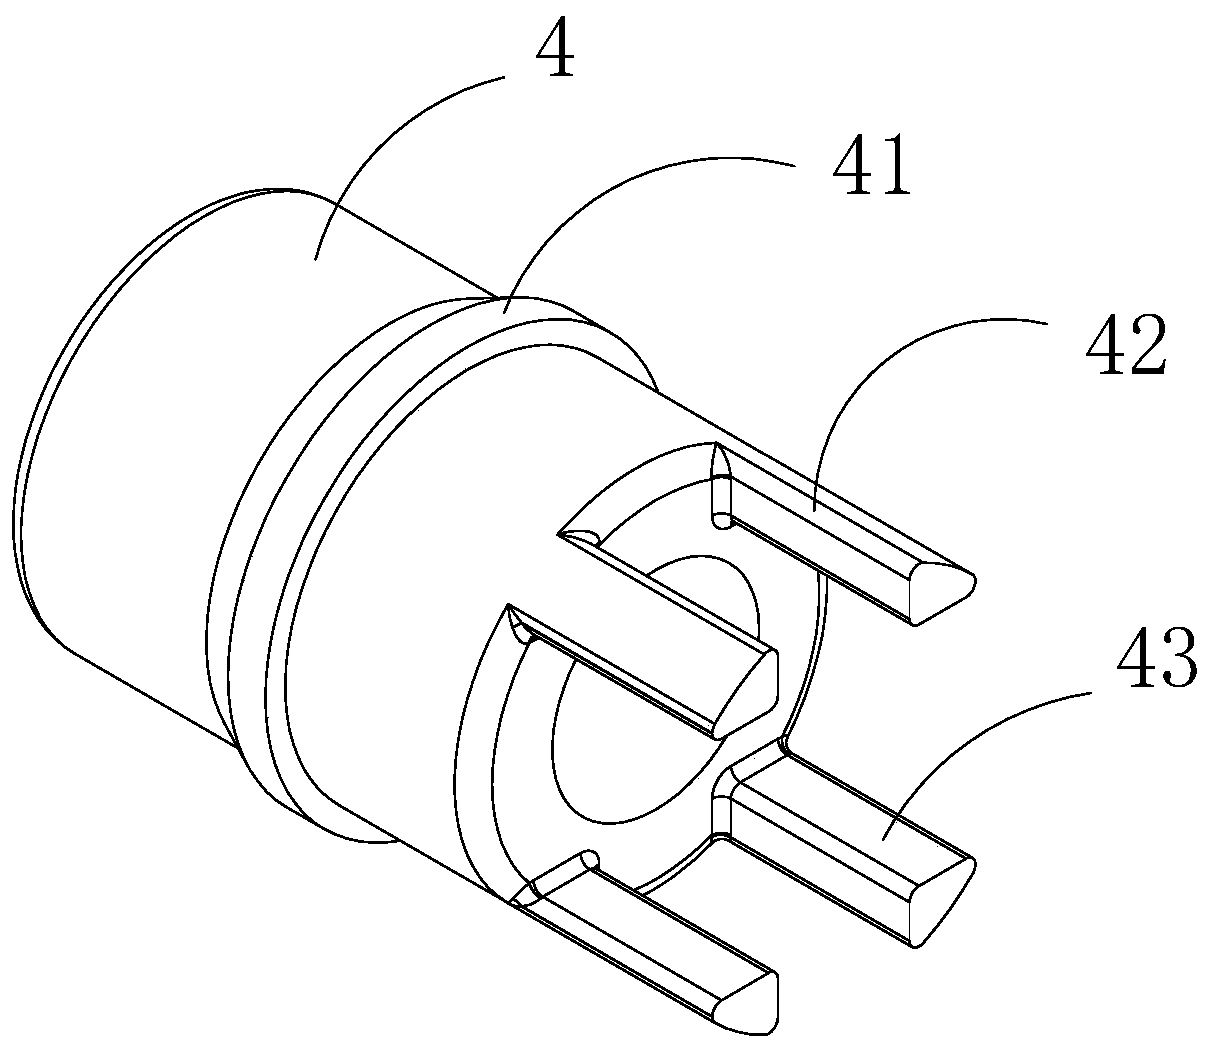 Hemostatic clip of continuous-pushing structure